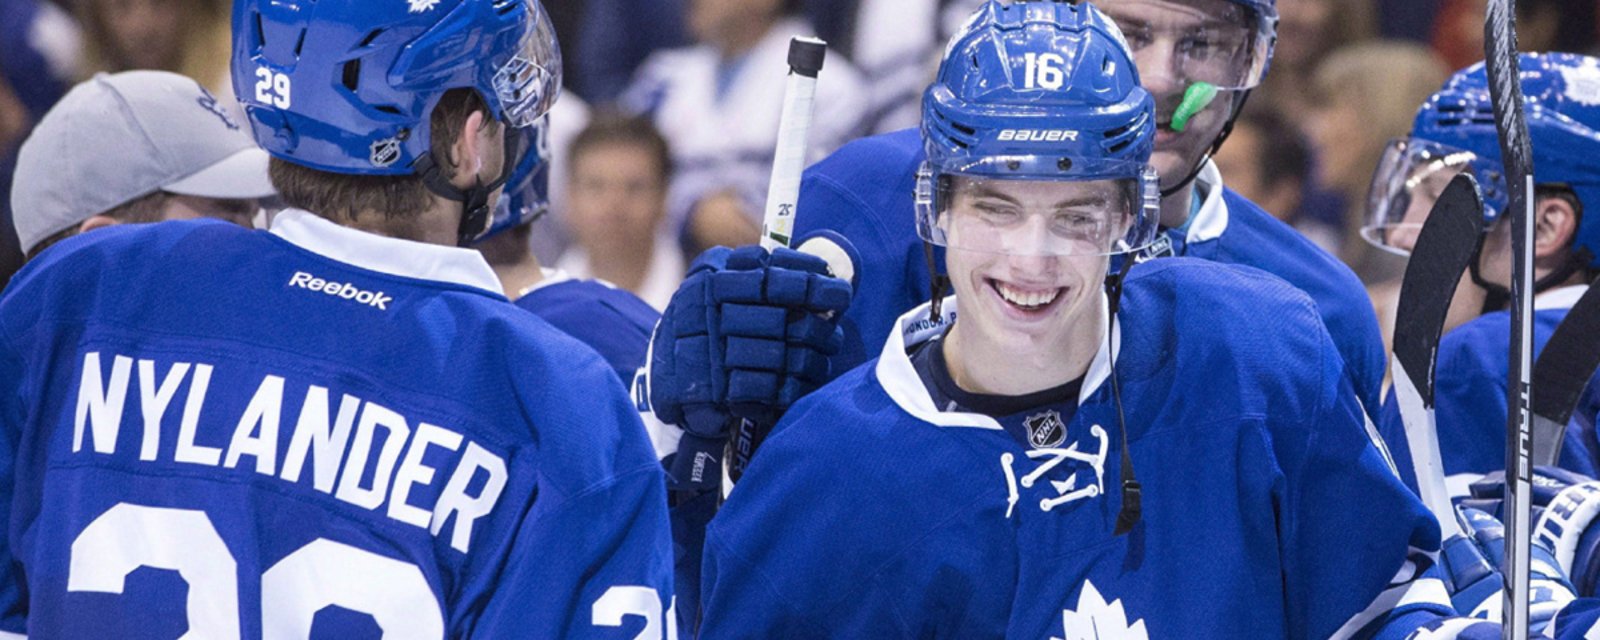 Your Call: Who will score more points in 2017-18? Marner or Nylander?